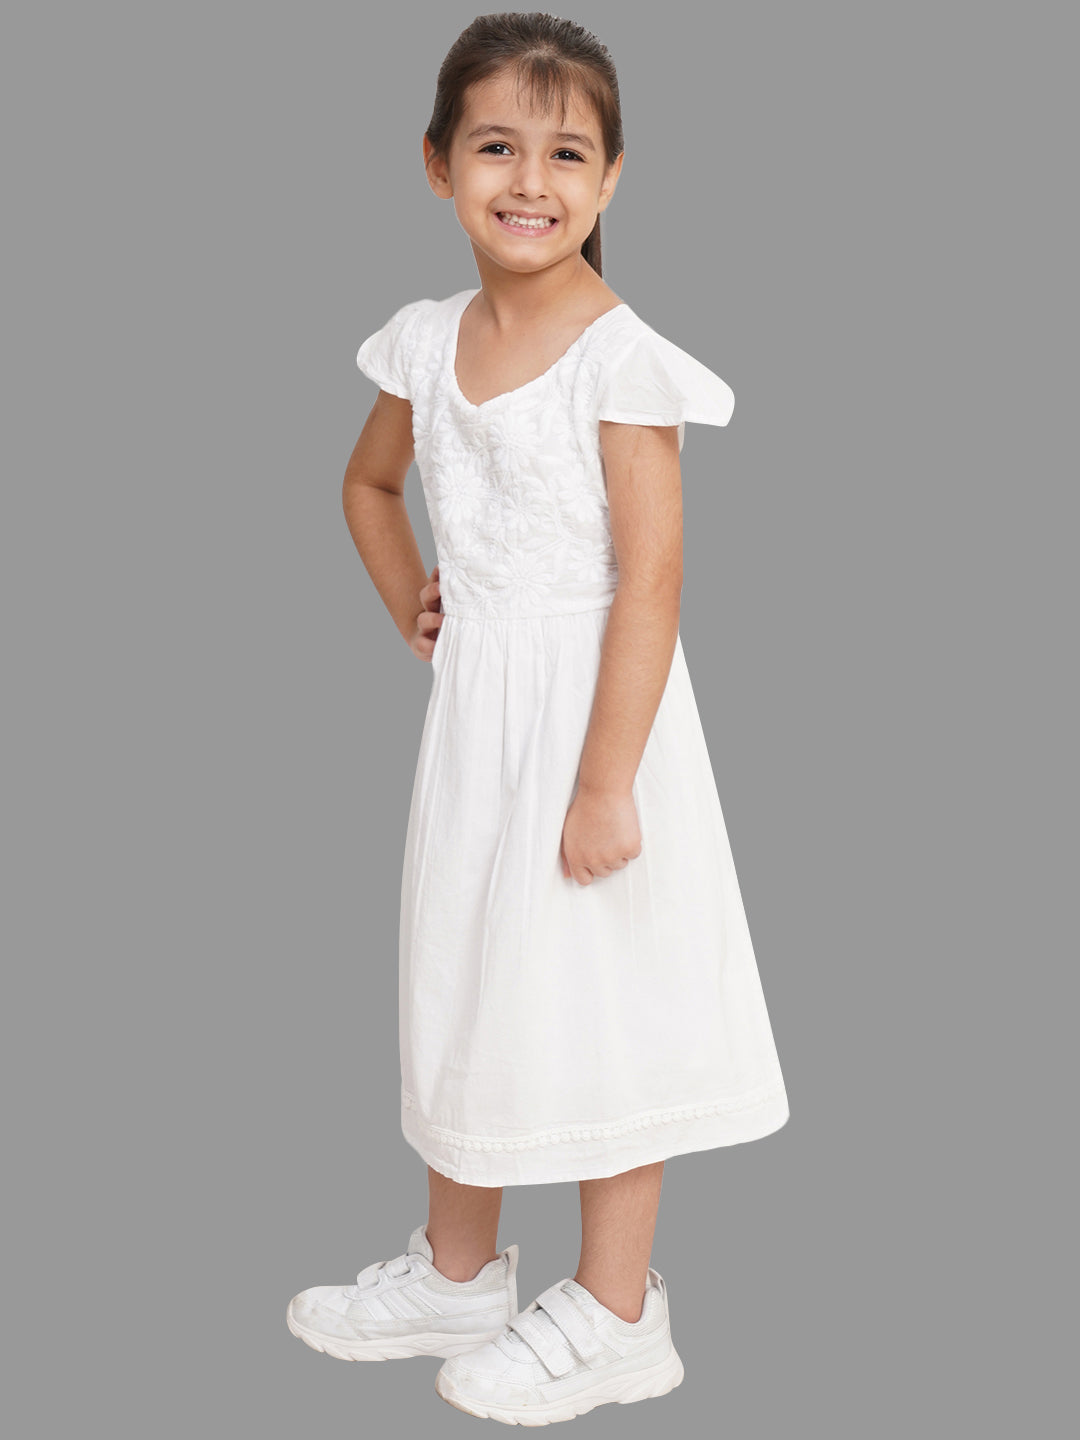 CREATIVE KID'S White Embroidered Cotton A-Line Dress for Girl